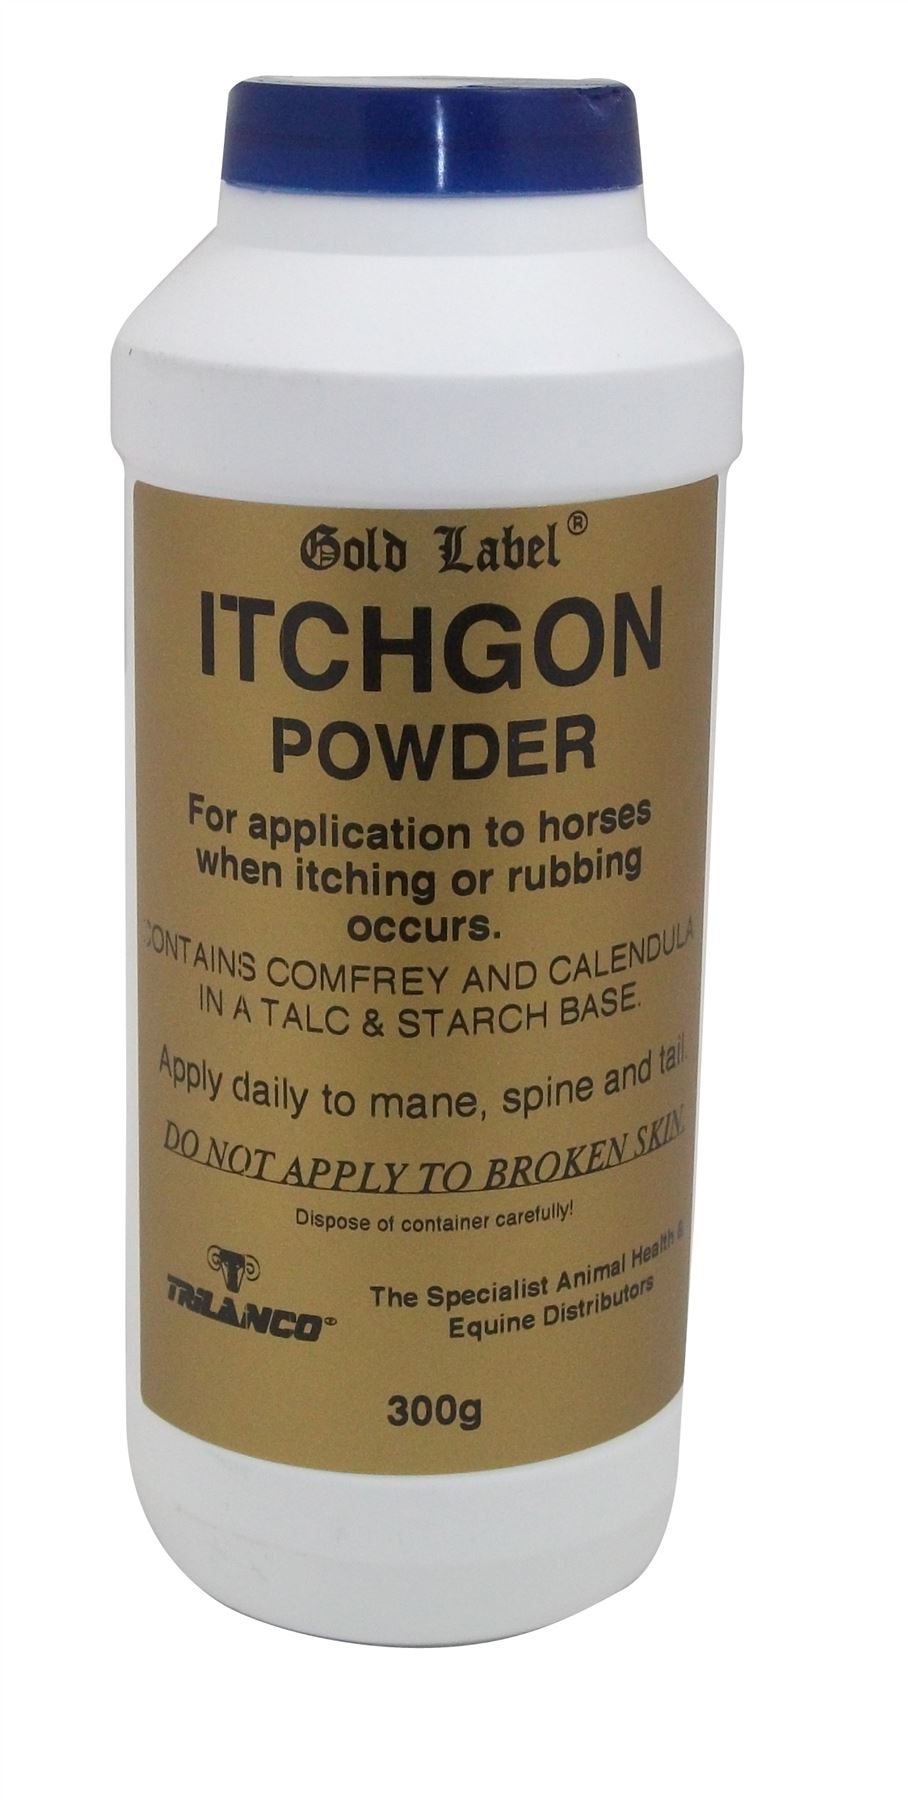 Gold Label Itchgon Powder - Just Horse Riders